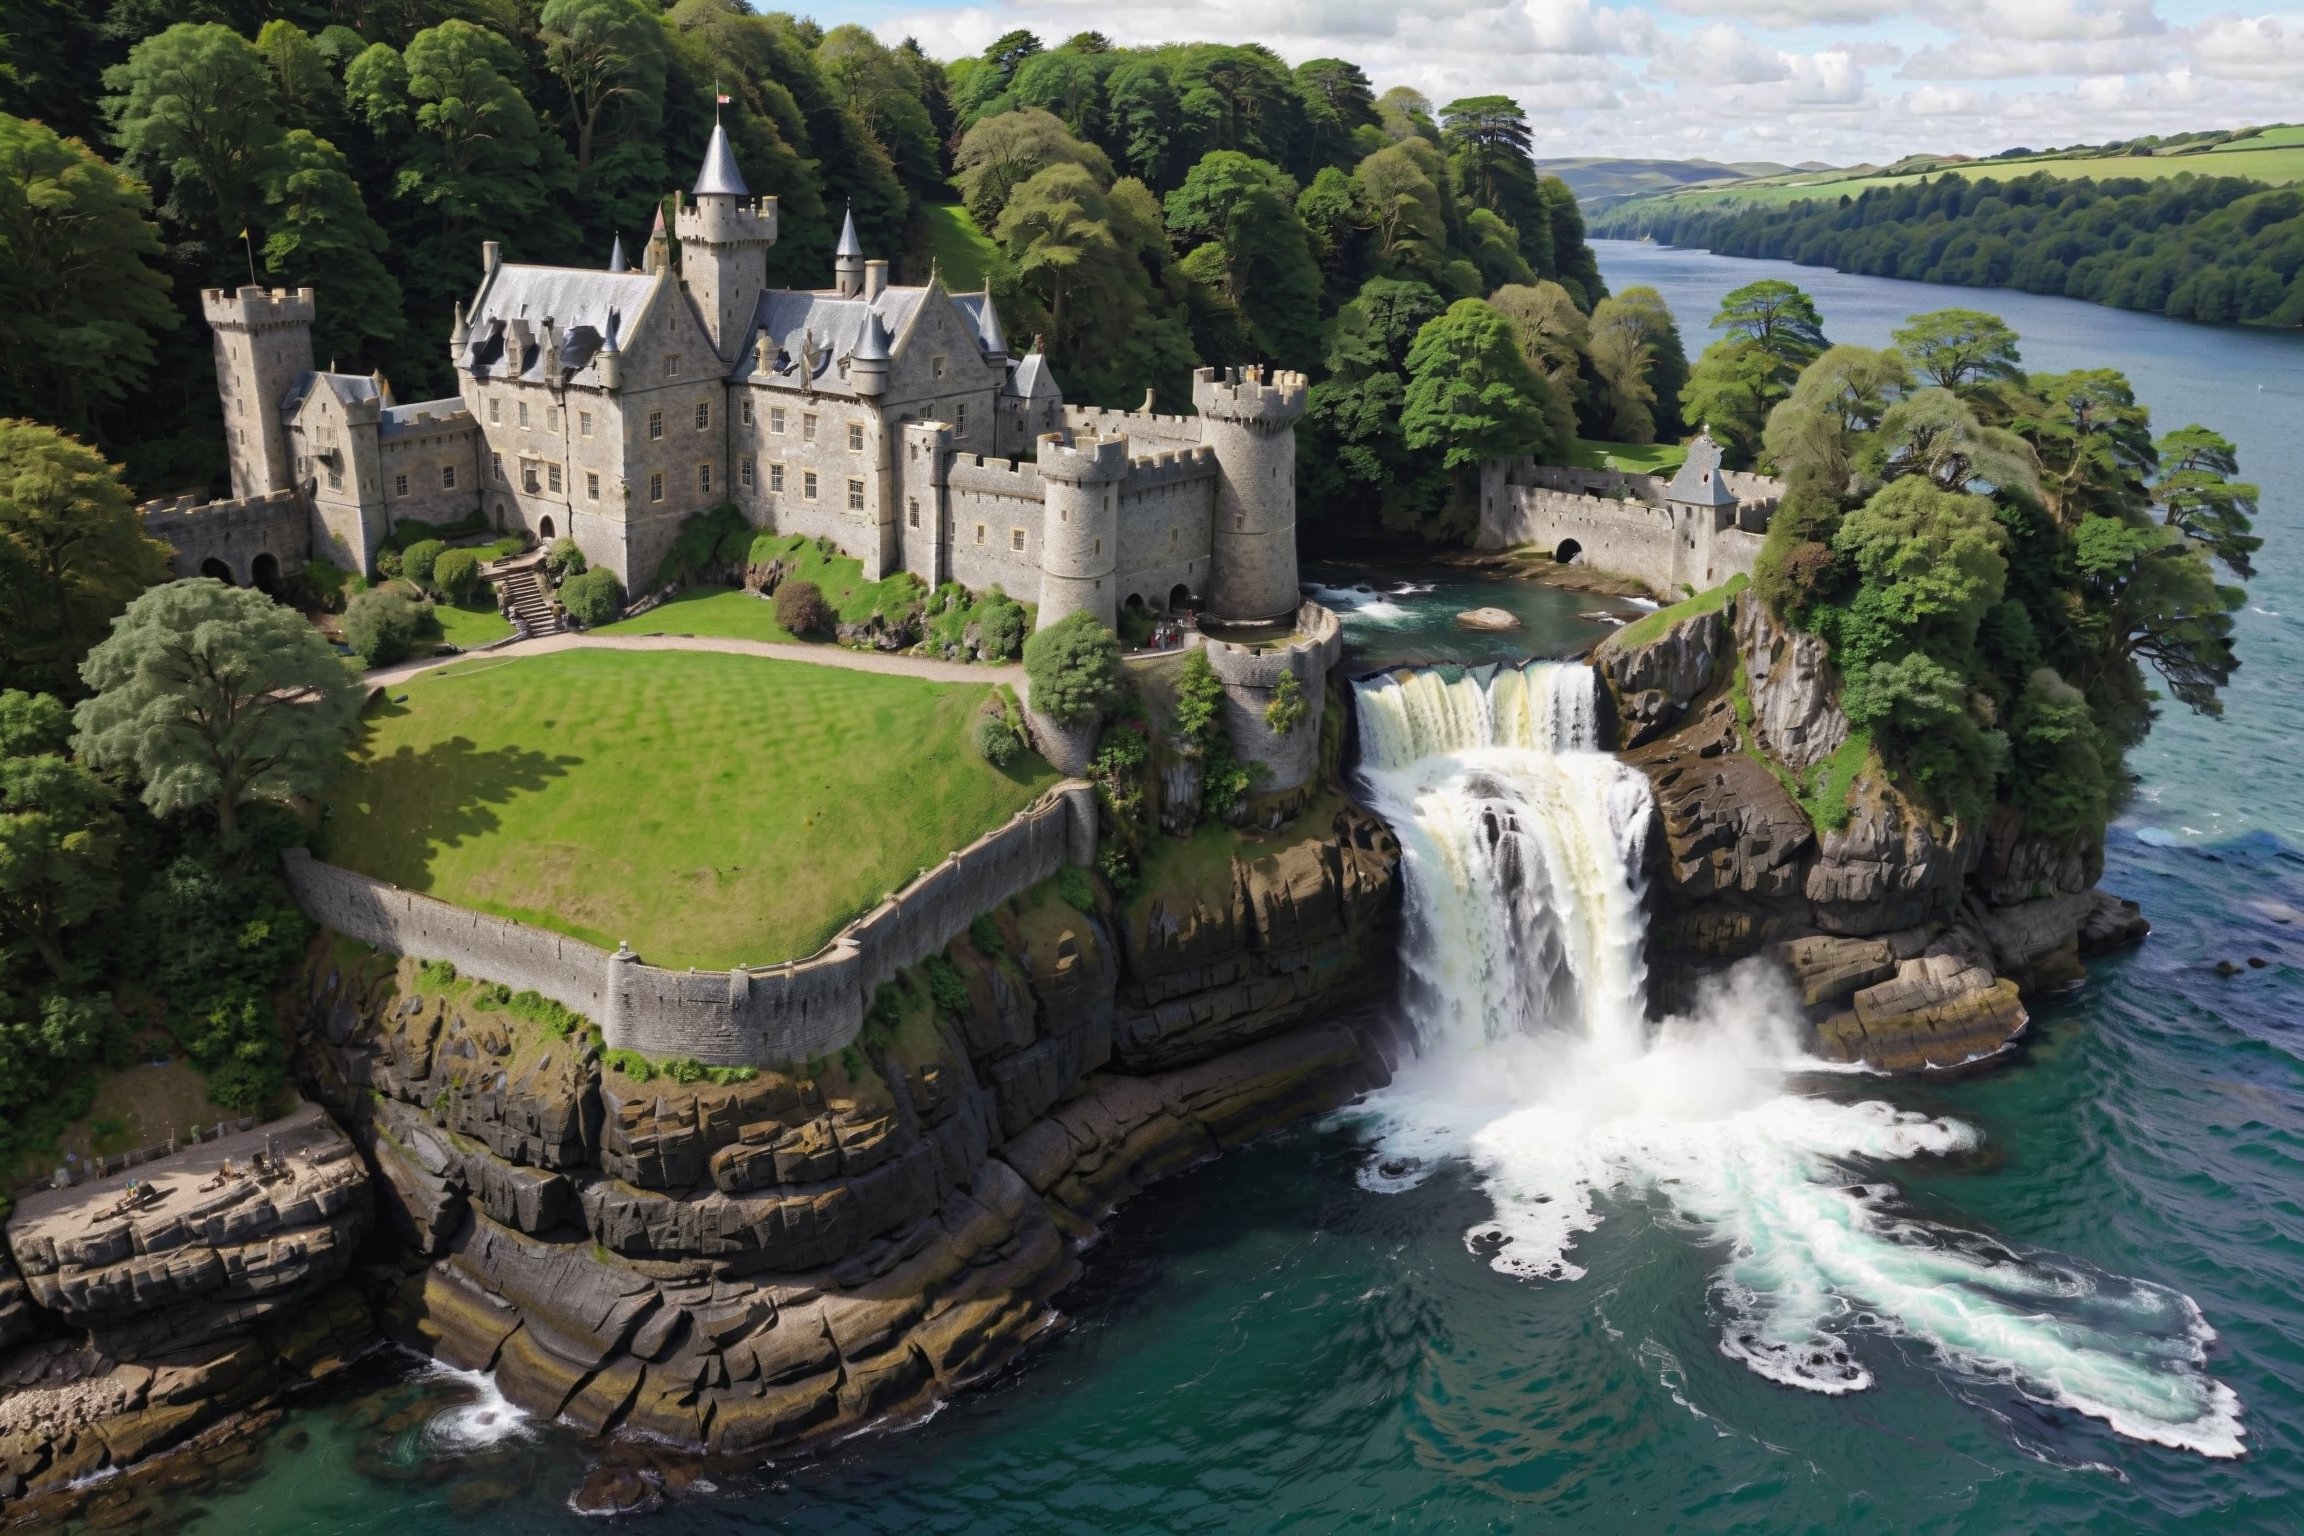 (long_shot:1.3), (masterpiece), (best_quality:1.4), more detail XL,  Extremely Realistic,  Photorealism,

Castletown, on an island surrounded by lake, at the base of a massive waterfall which falls on both sides of the castle into the lake